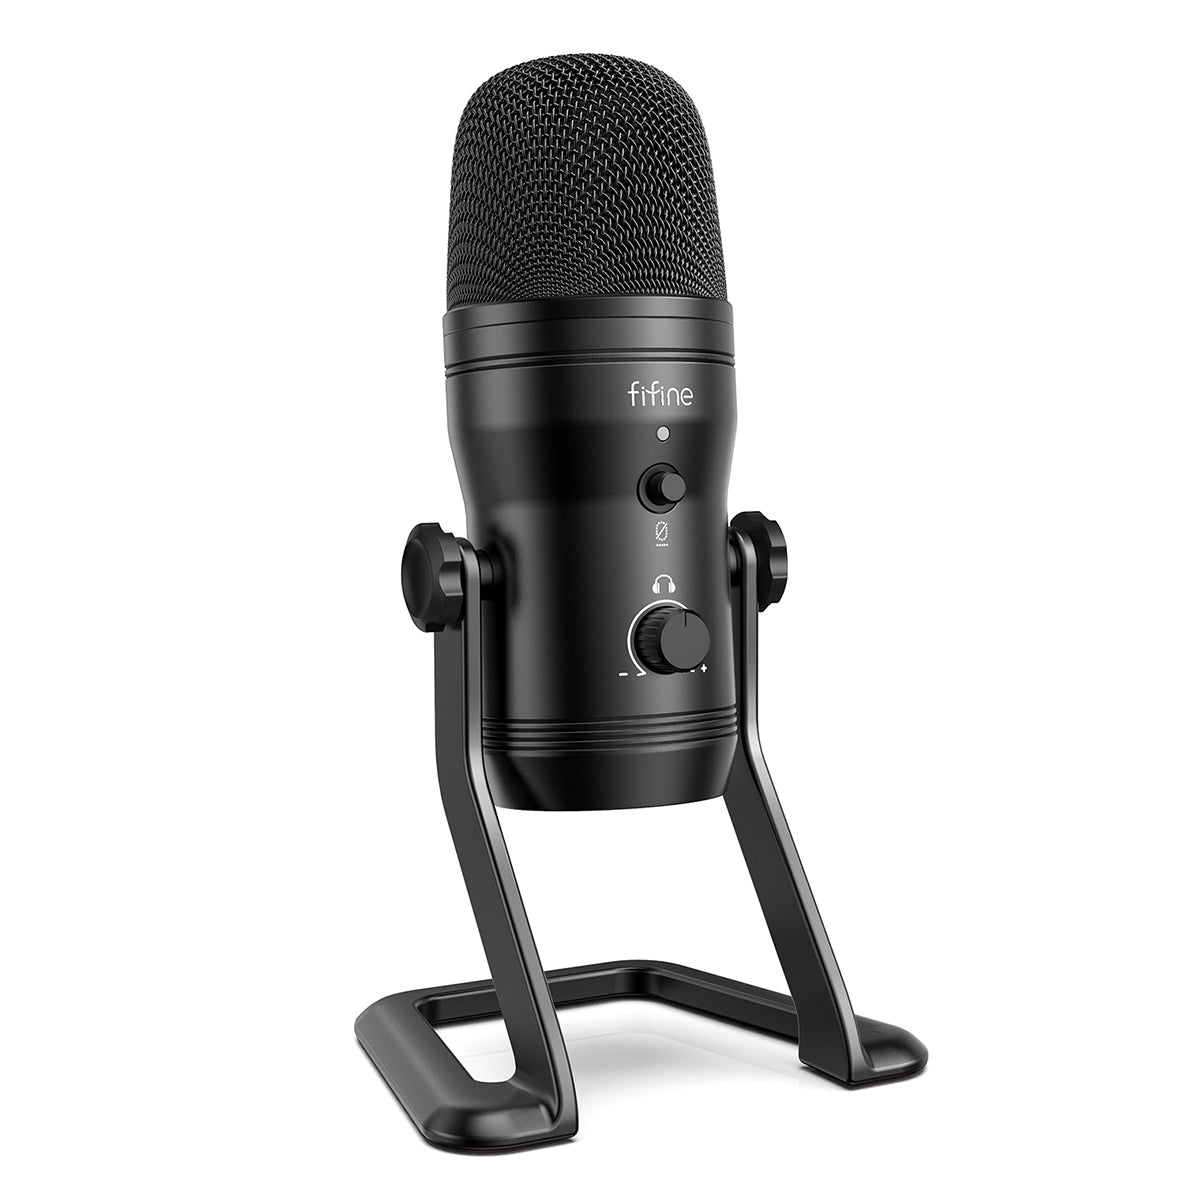 FIFINE K669 USB Microphone with Volume Dial for Streaming, Vocal